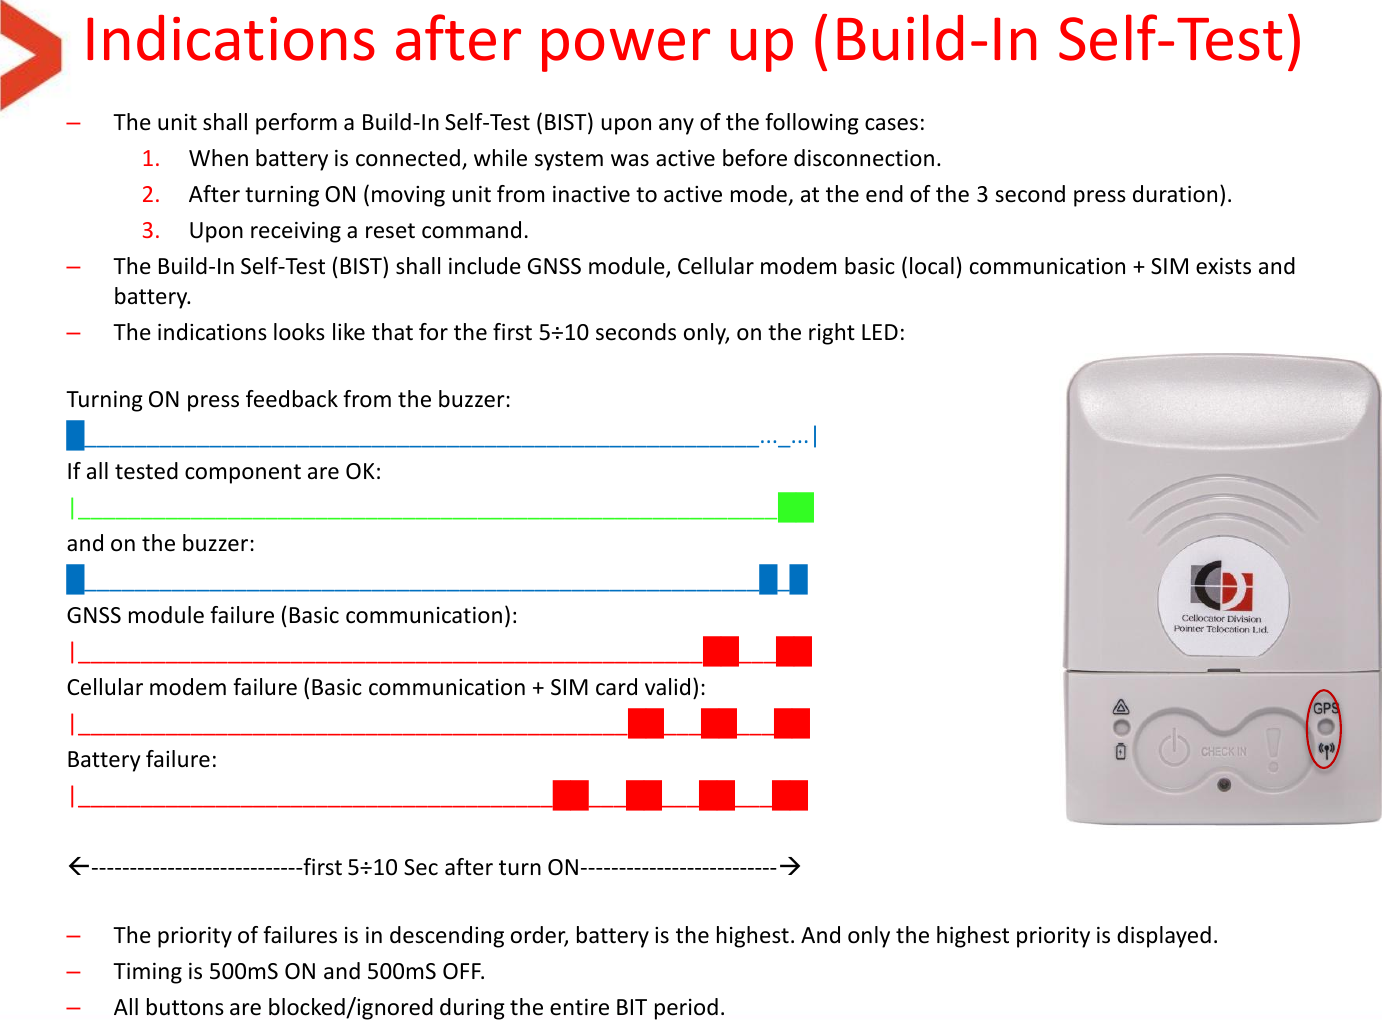 Indications after power up (Build-In Self-Test) –The unit shall perform a Build-In Self-Test (BIST) upon any of the following cases: 1. When battery is connected, while system was active before disconnection. 2. After turning ON (moving unit from inactive to active mode, at the end of the 3 second press duration). 3. Upon receiving a reset command. –The Build-In Self-Test (BIST) shall include GNSS module, Cellular modem basic (local) communication + SIM exists and battery. –The indications looks like that for the first 5÷10 seconds only, on the right LED:  Turning ON press feedback from the buzzer: █______________________________________________________..._...| If all tested component are OK: |________________________________________________________██ and on the buzzer: █______________________________________________________█_█ GNSS module failure (Basic communication):  |__________________________________________________██___██ Cellular modem failure (Basic communication + SIM card valid):  |____________________________________________██___██___██ Battery failure:  |______________________________________██___██___██___██  ----------------------------first 5÷10 Sec after turn ON--------------------------  –The priority of failures is in descending order, battery is the highest. And only the highest priority is displayed. –Timing is 500mS ON and 500mS OFF. –All buttons are blocked/ignored during the entire BIT period.  